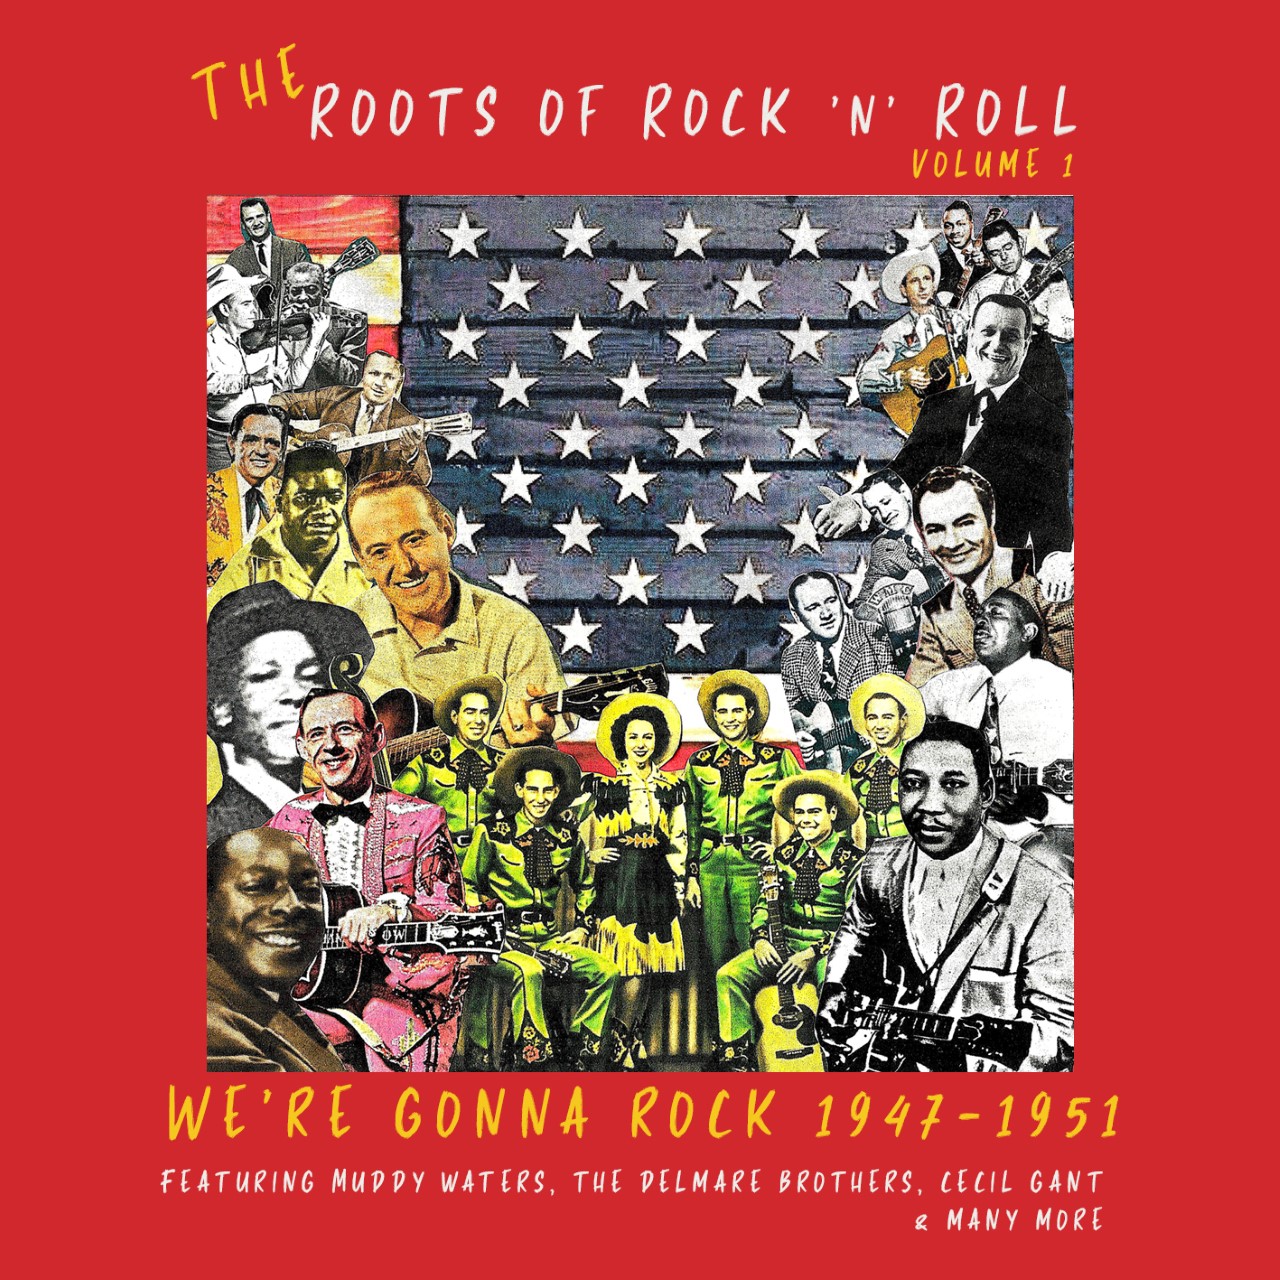  THE ROOTS OF ROCK ’N’ ROLL VOL 1 ‘We’re Gonna Rock’ 1947-1951